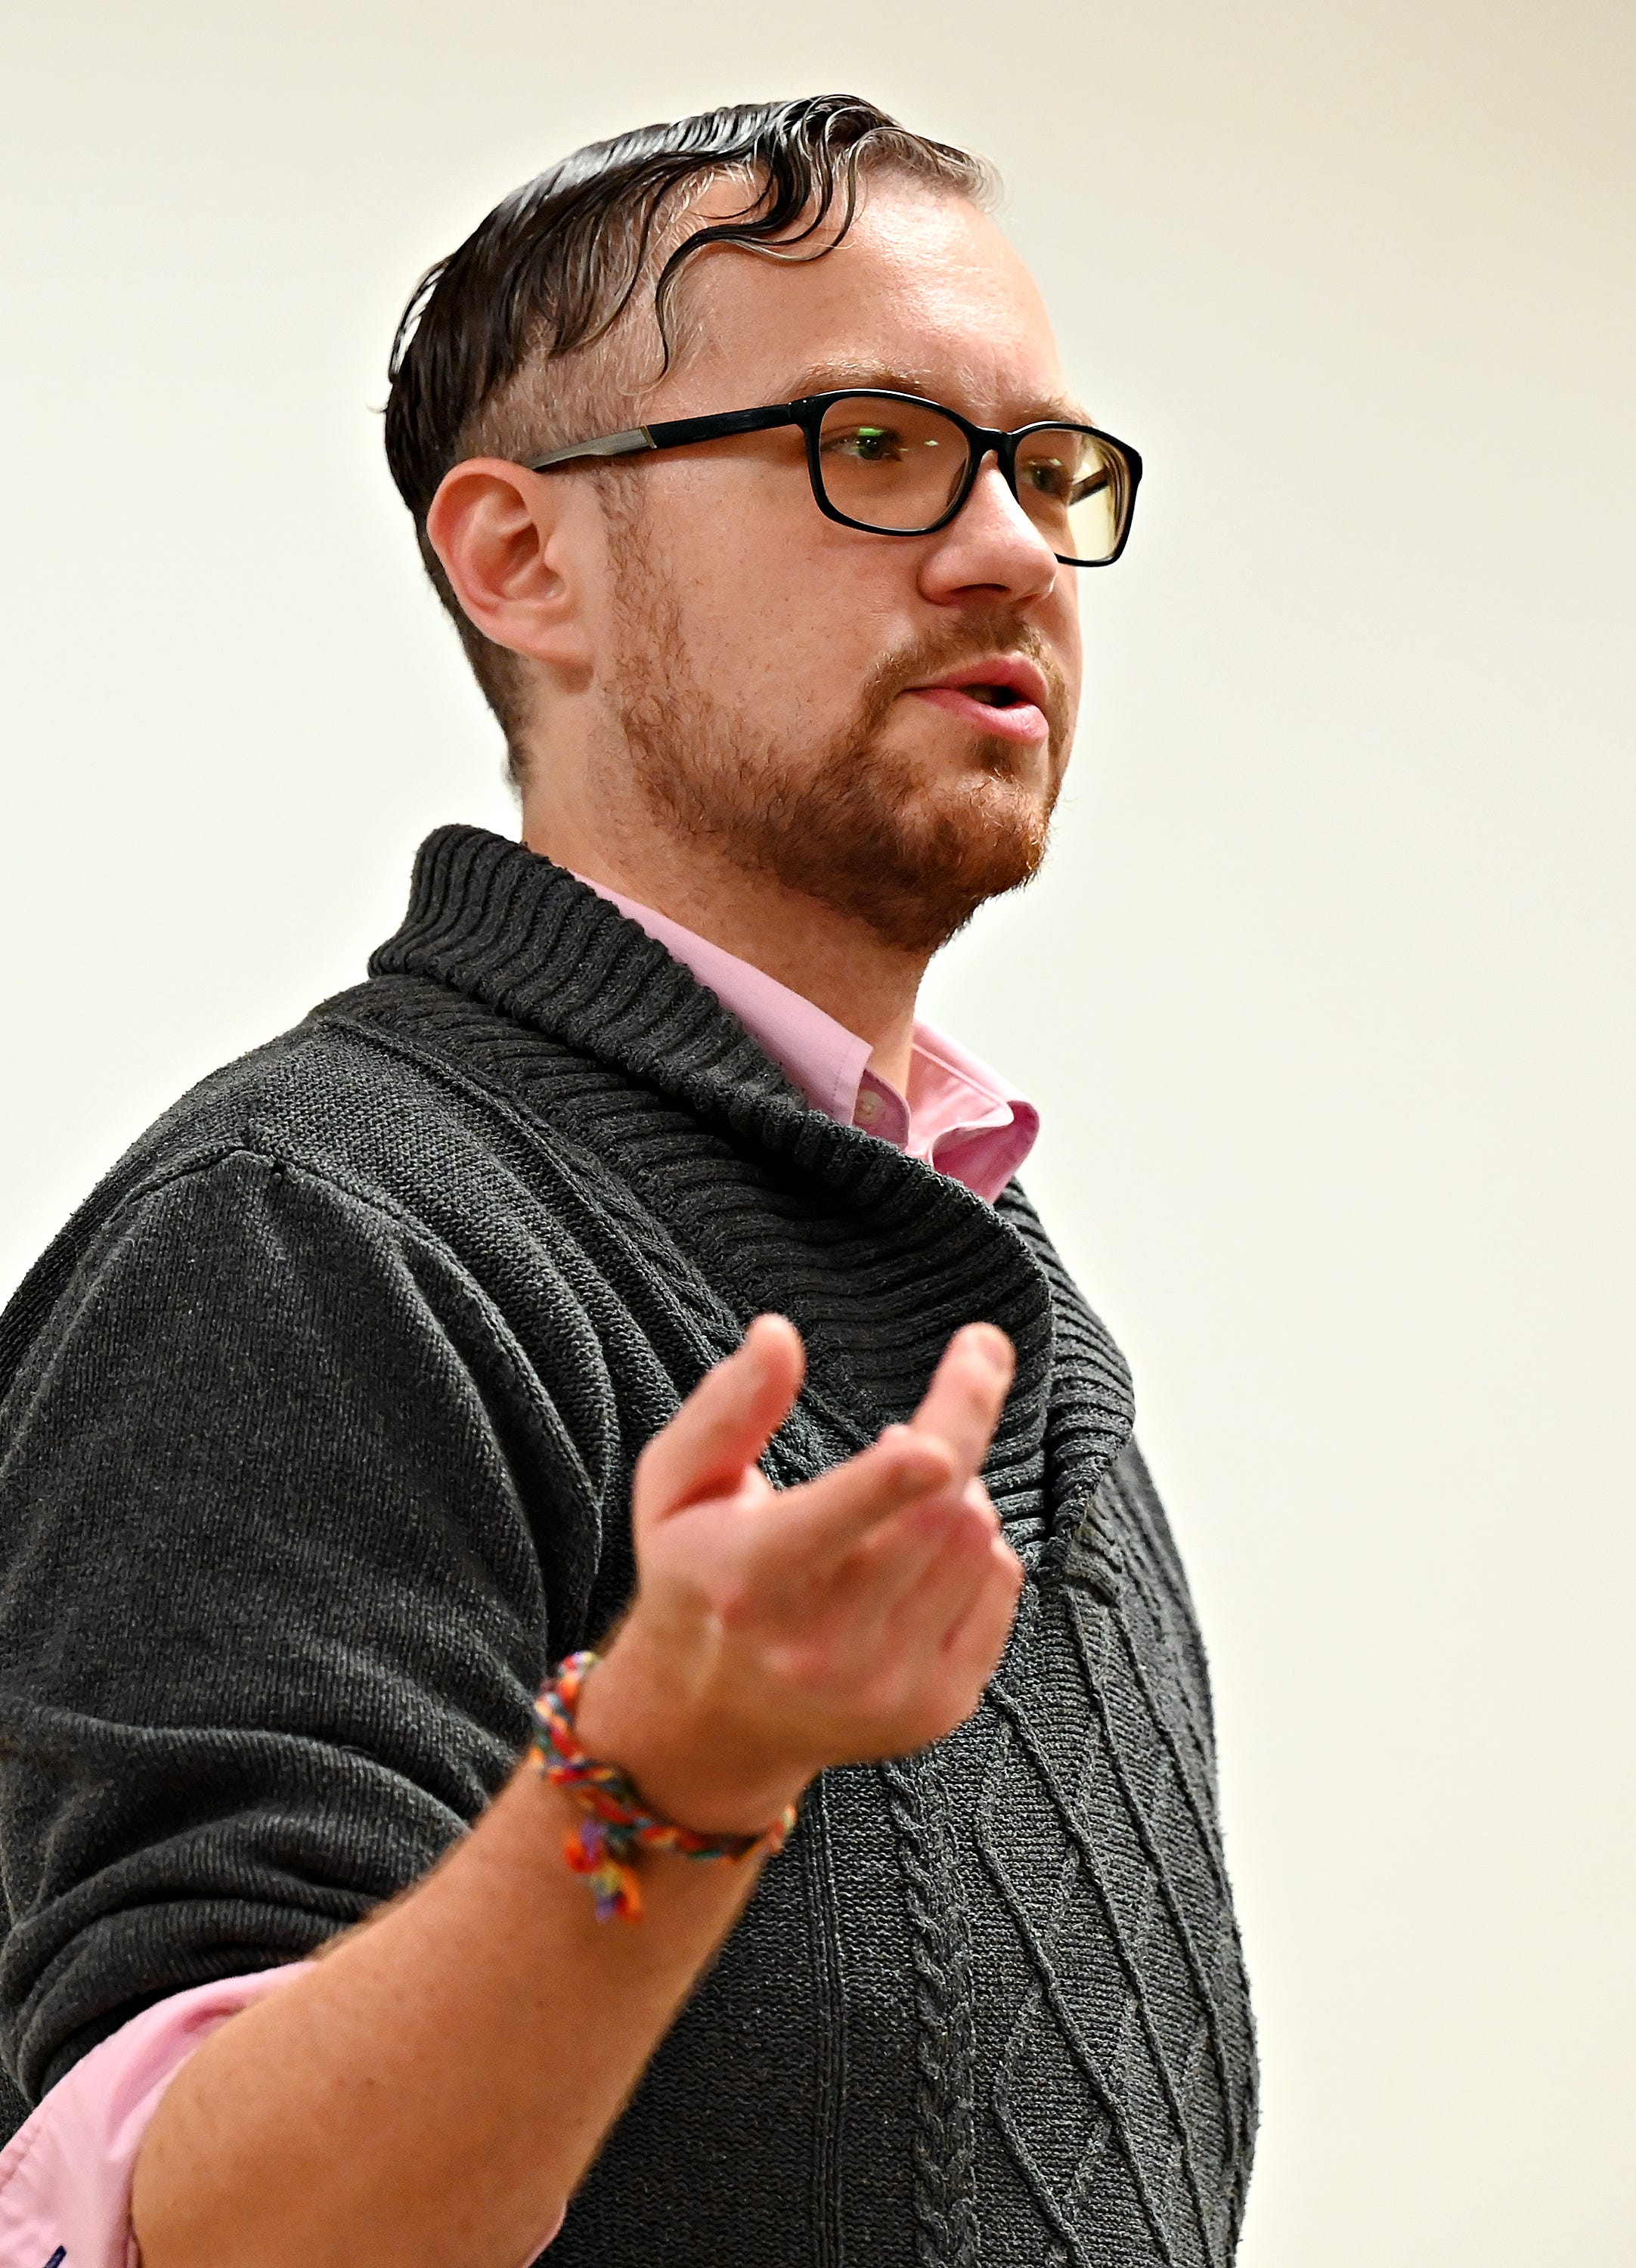 York Dispatch managing editor Wallace McKelvey speaks to a journalism class at York College of Pennsylvania in Spring Garden Township, Wednesday, Nov. 2, 2022. York College is partnering with The York Dispatch in a journalism mentoring program. Dawn J. Sagert/The York Dispatch